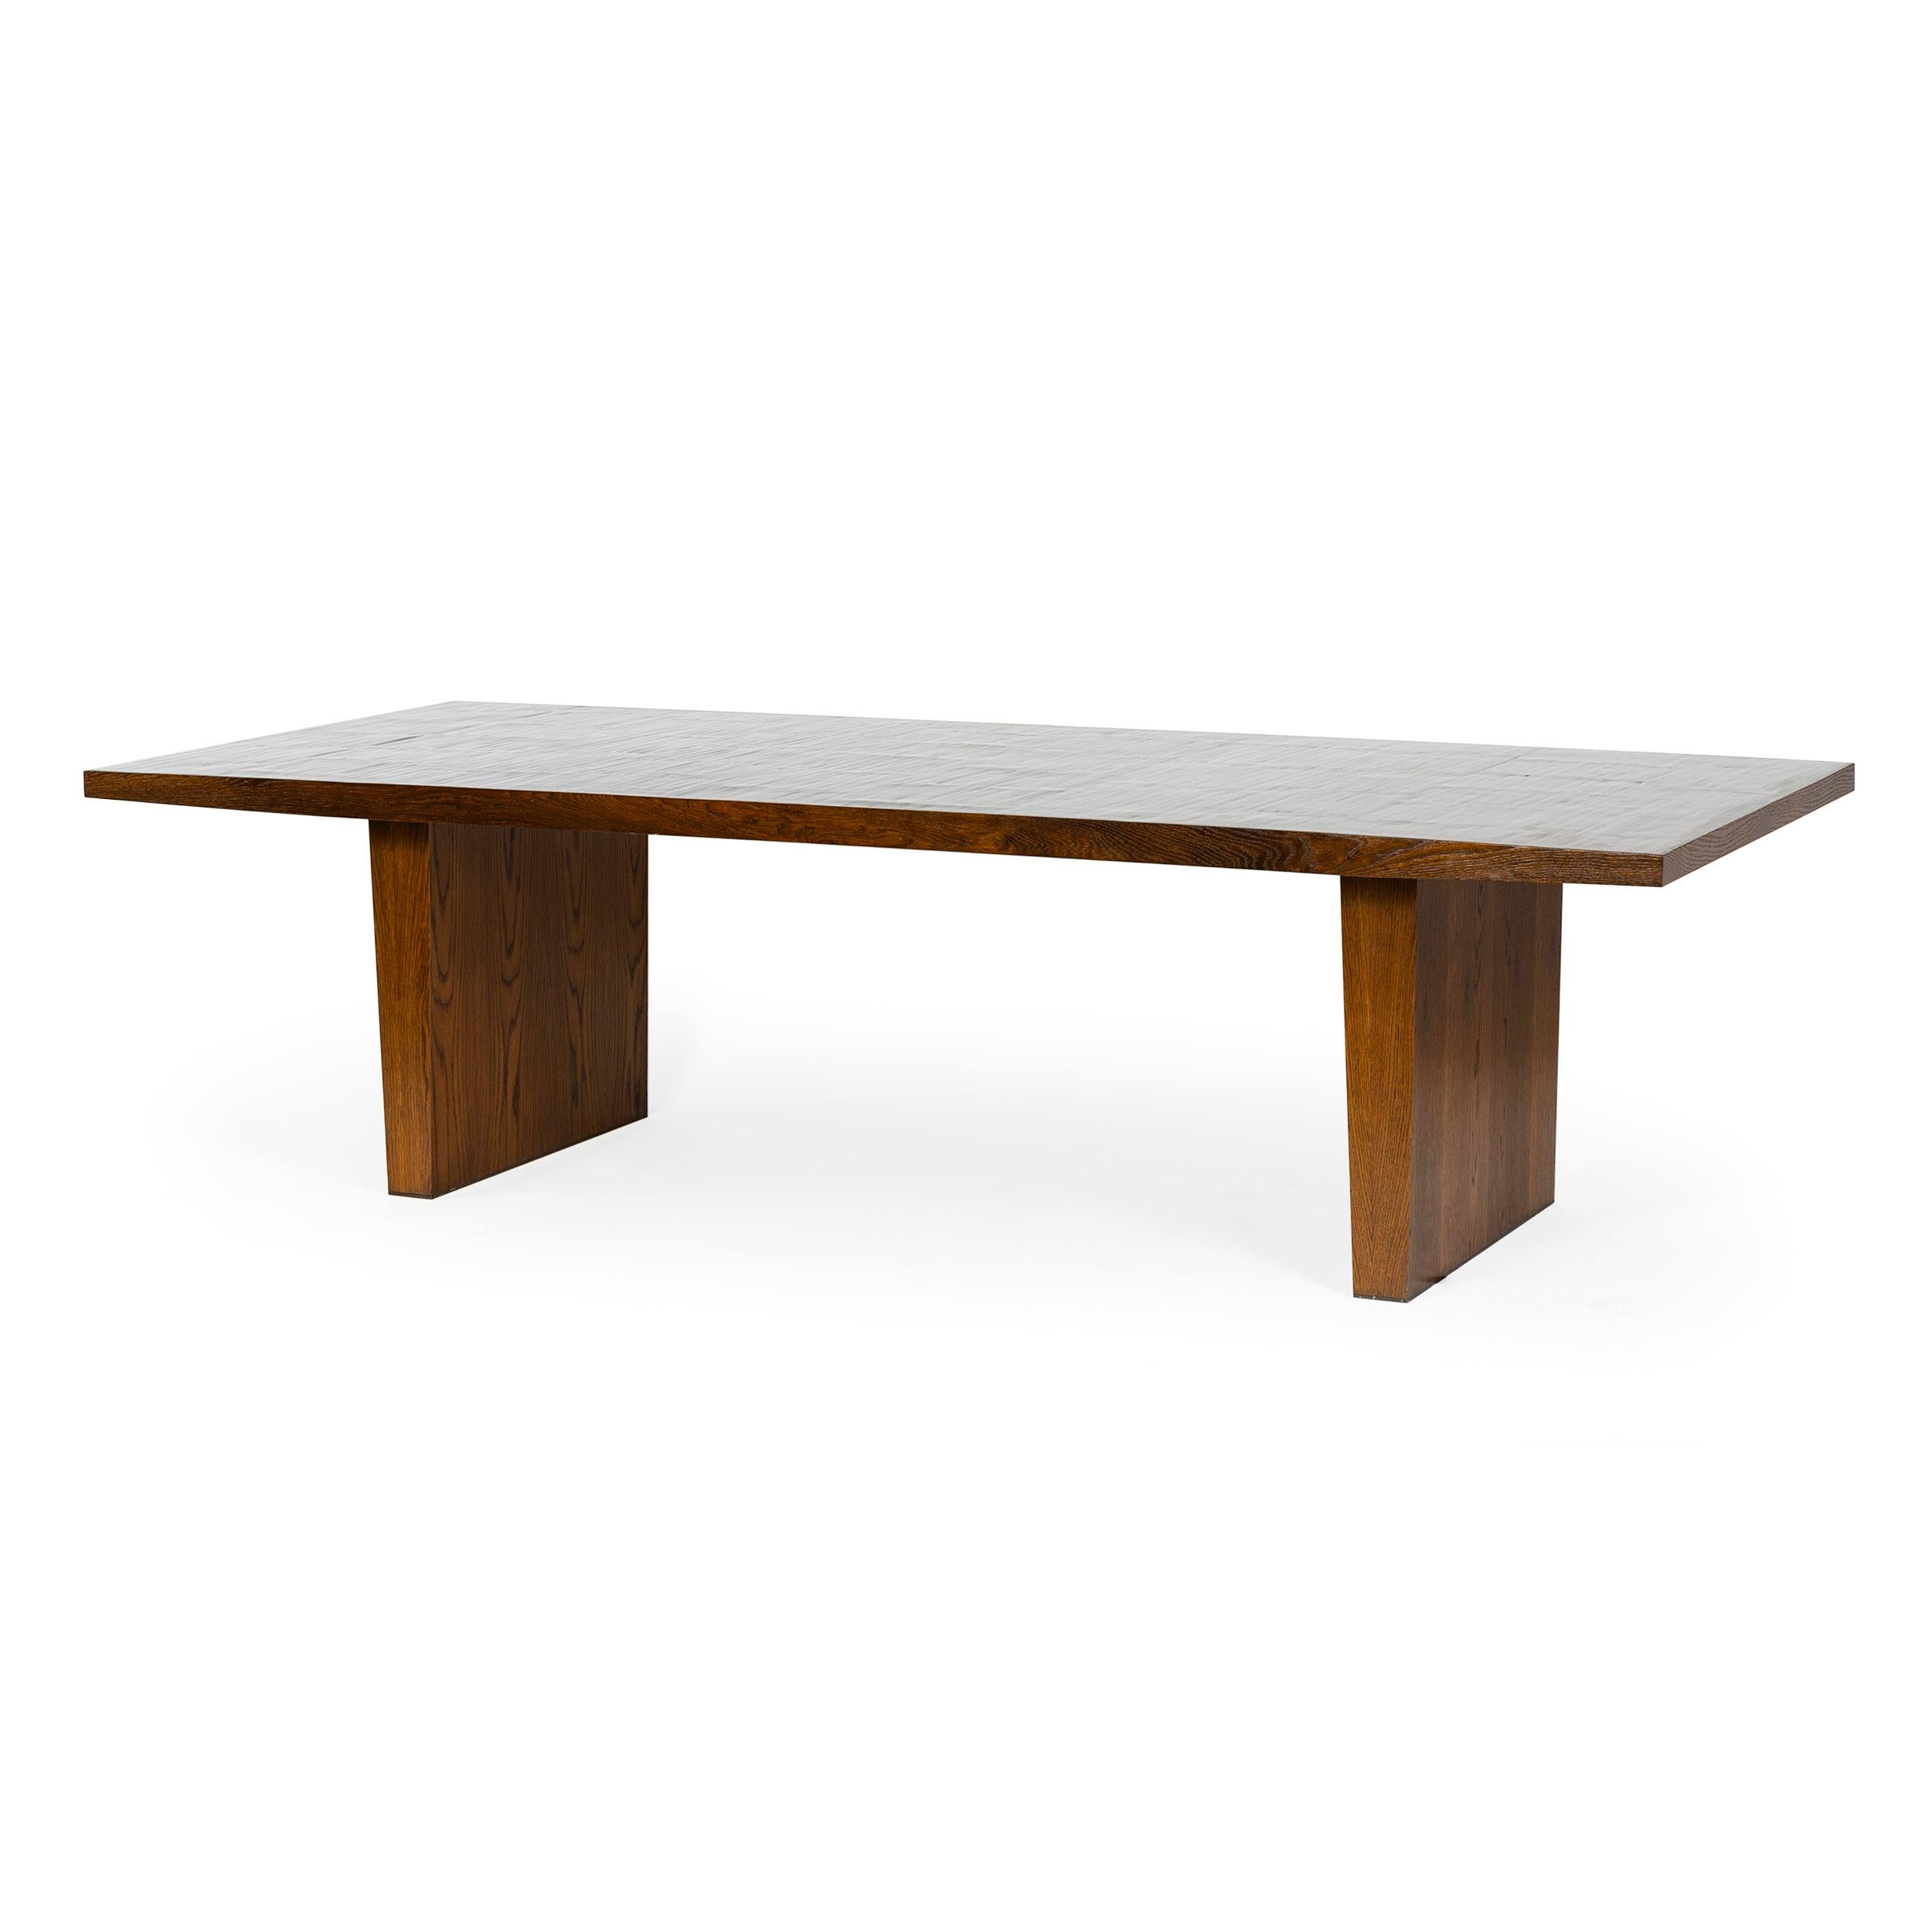 A dining table with a split bamboo top edged in oak with solid oak slab legs with brass feet, in a natural oil finish.